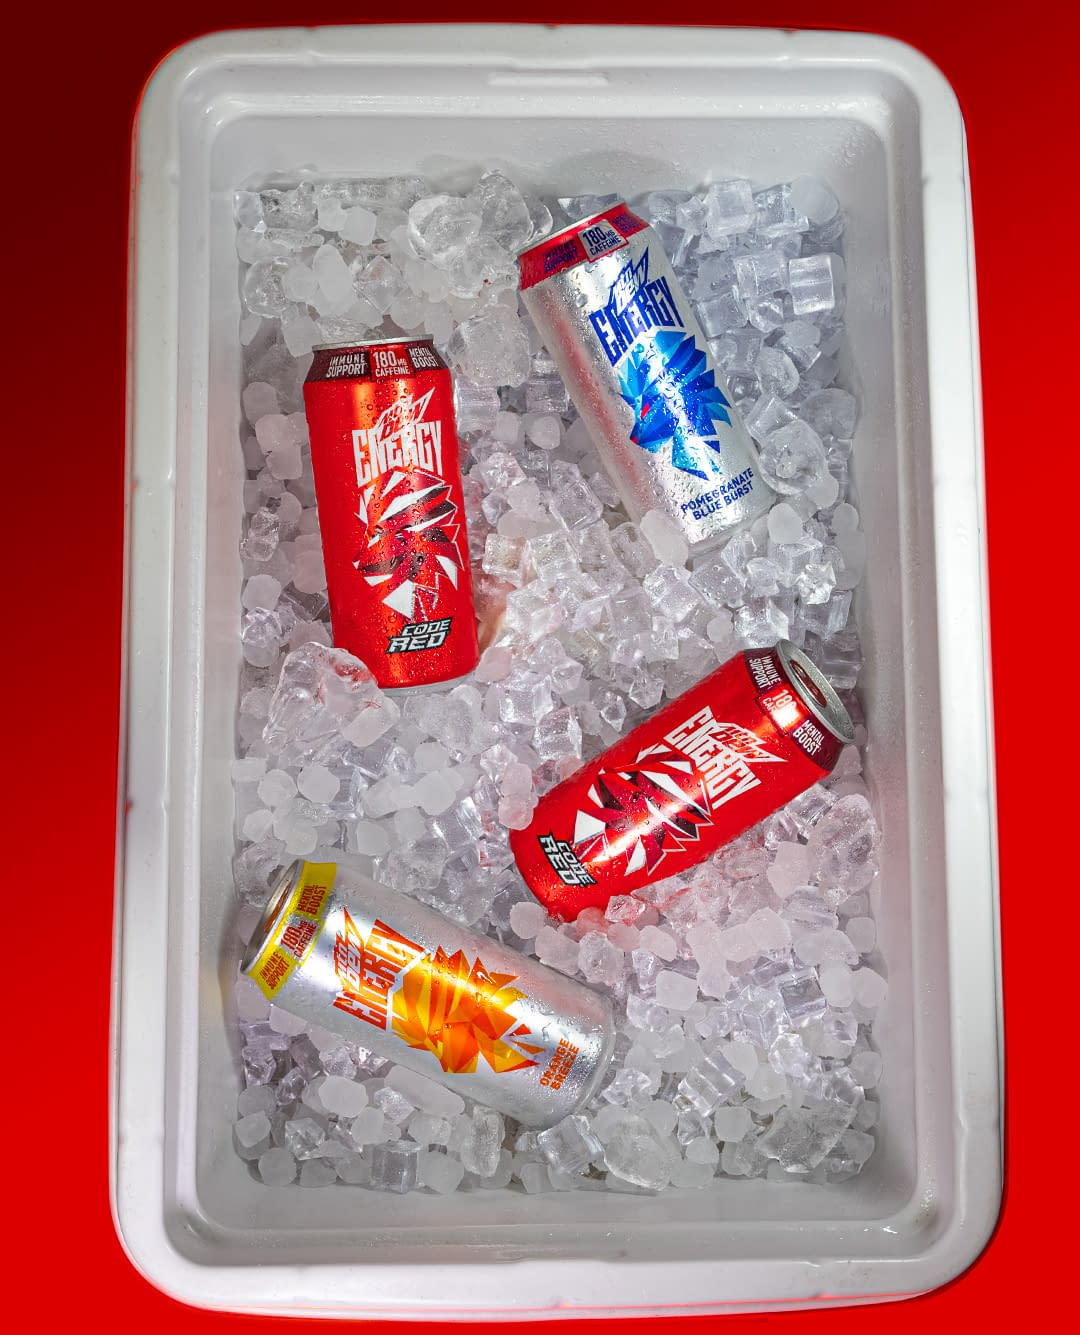 Get Energized with MTN DEW's Newest Energy Flavor: Code Red 